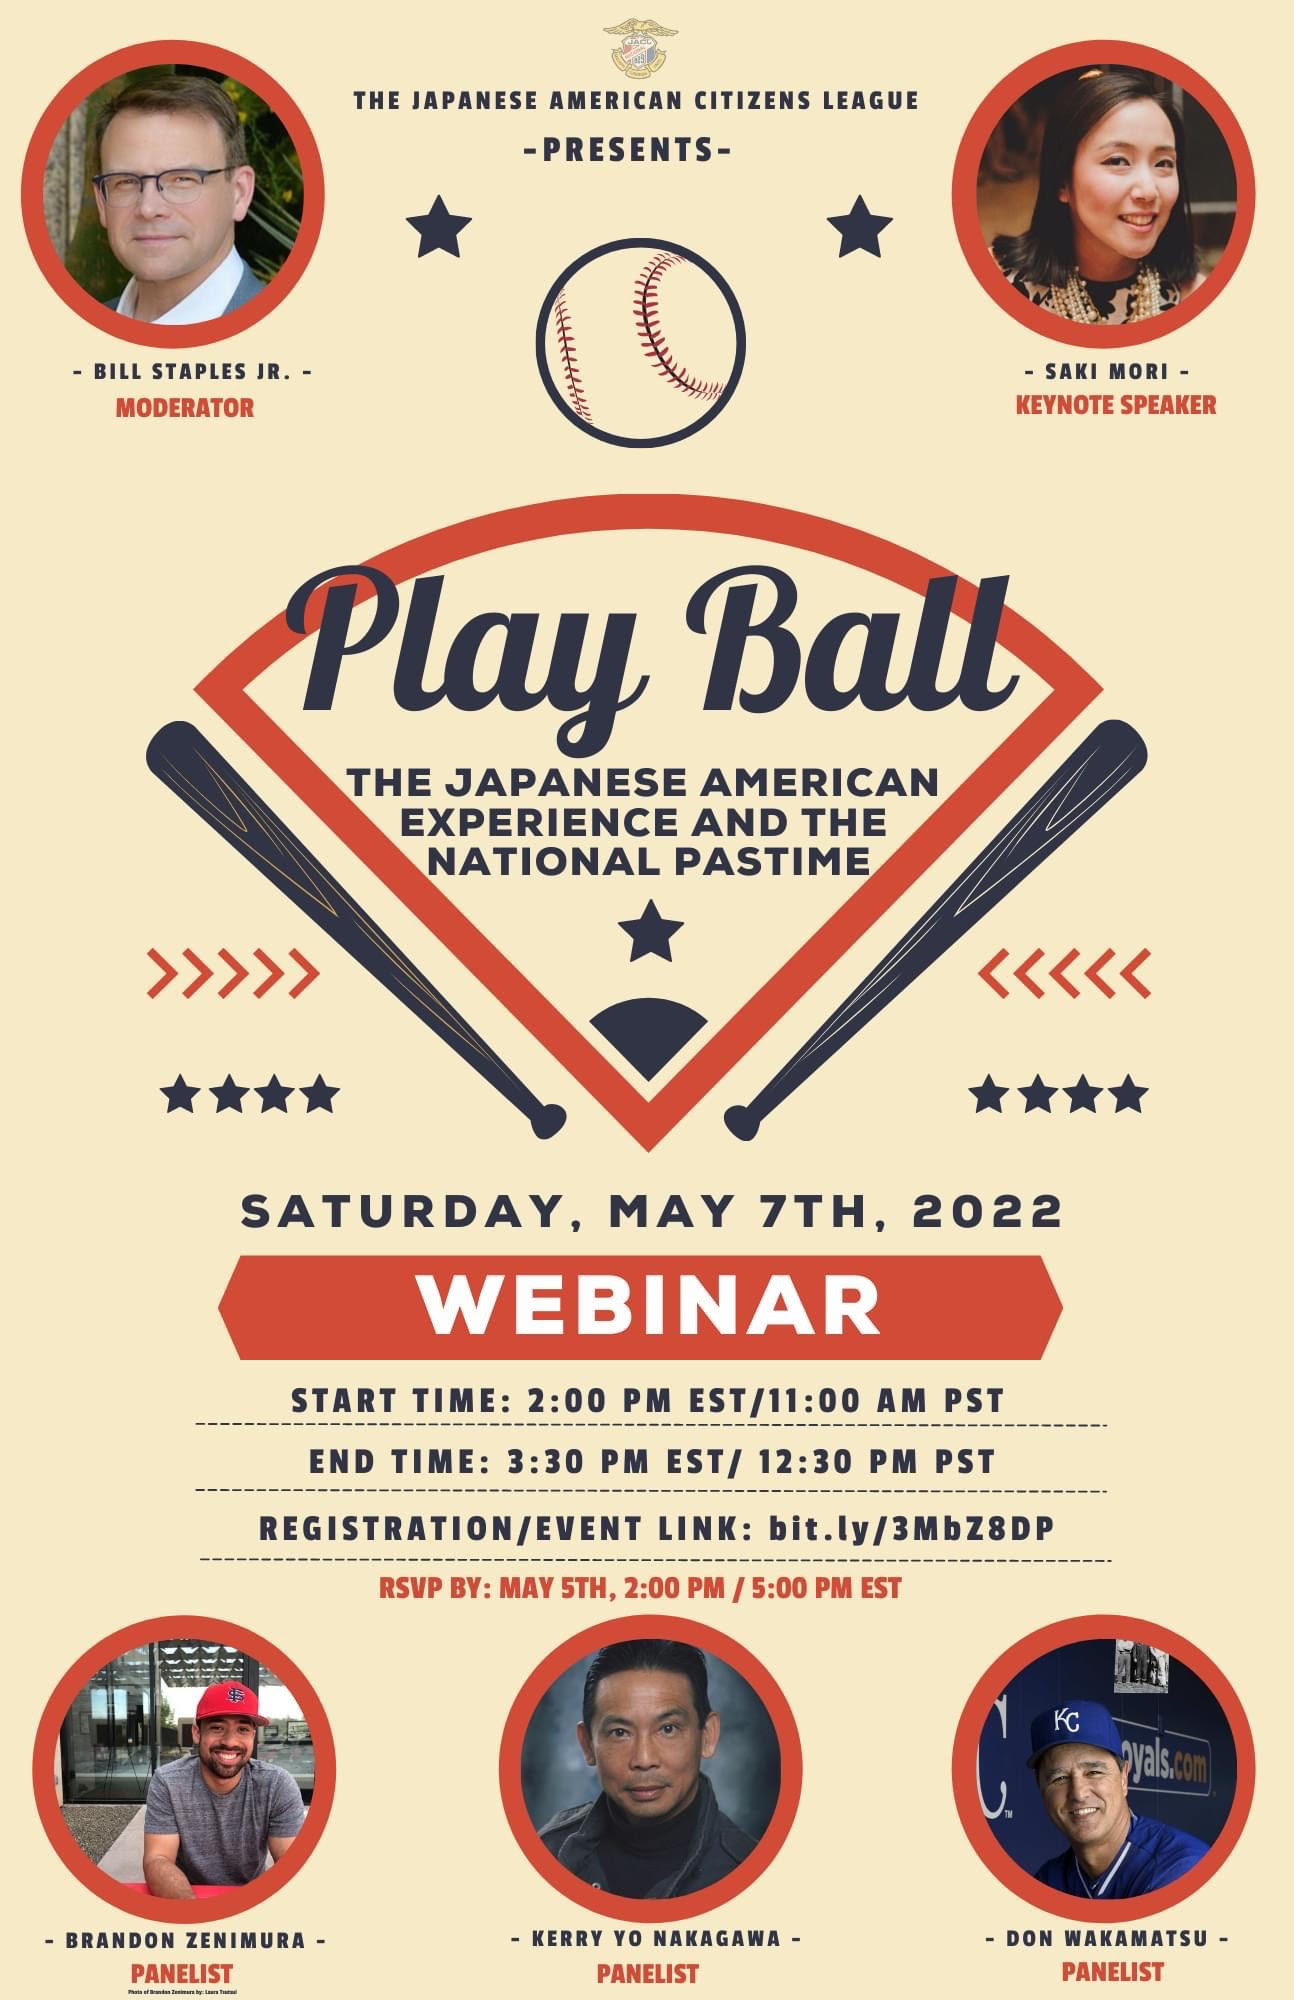 Play Ball! The Japanese American Experience and the National Pastime